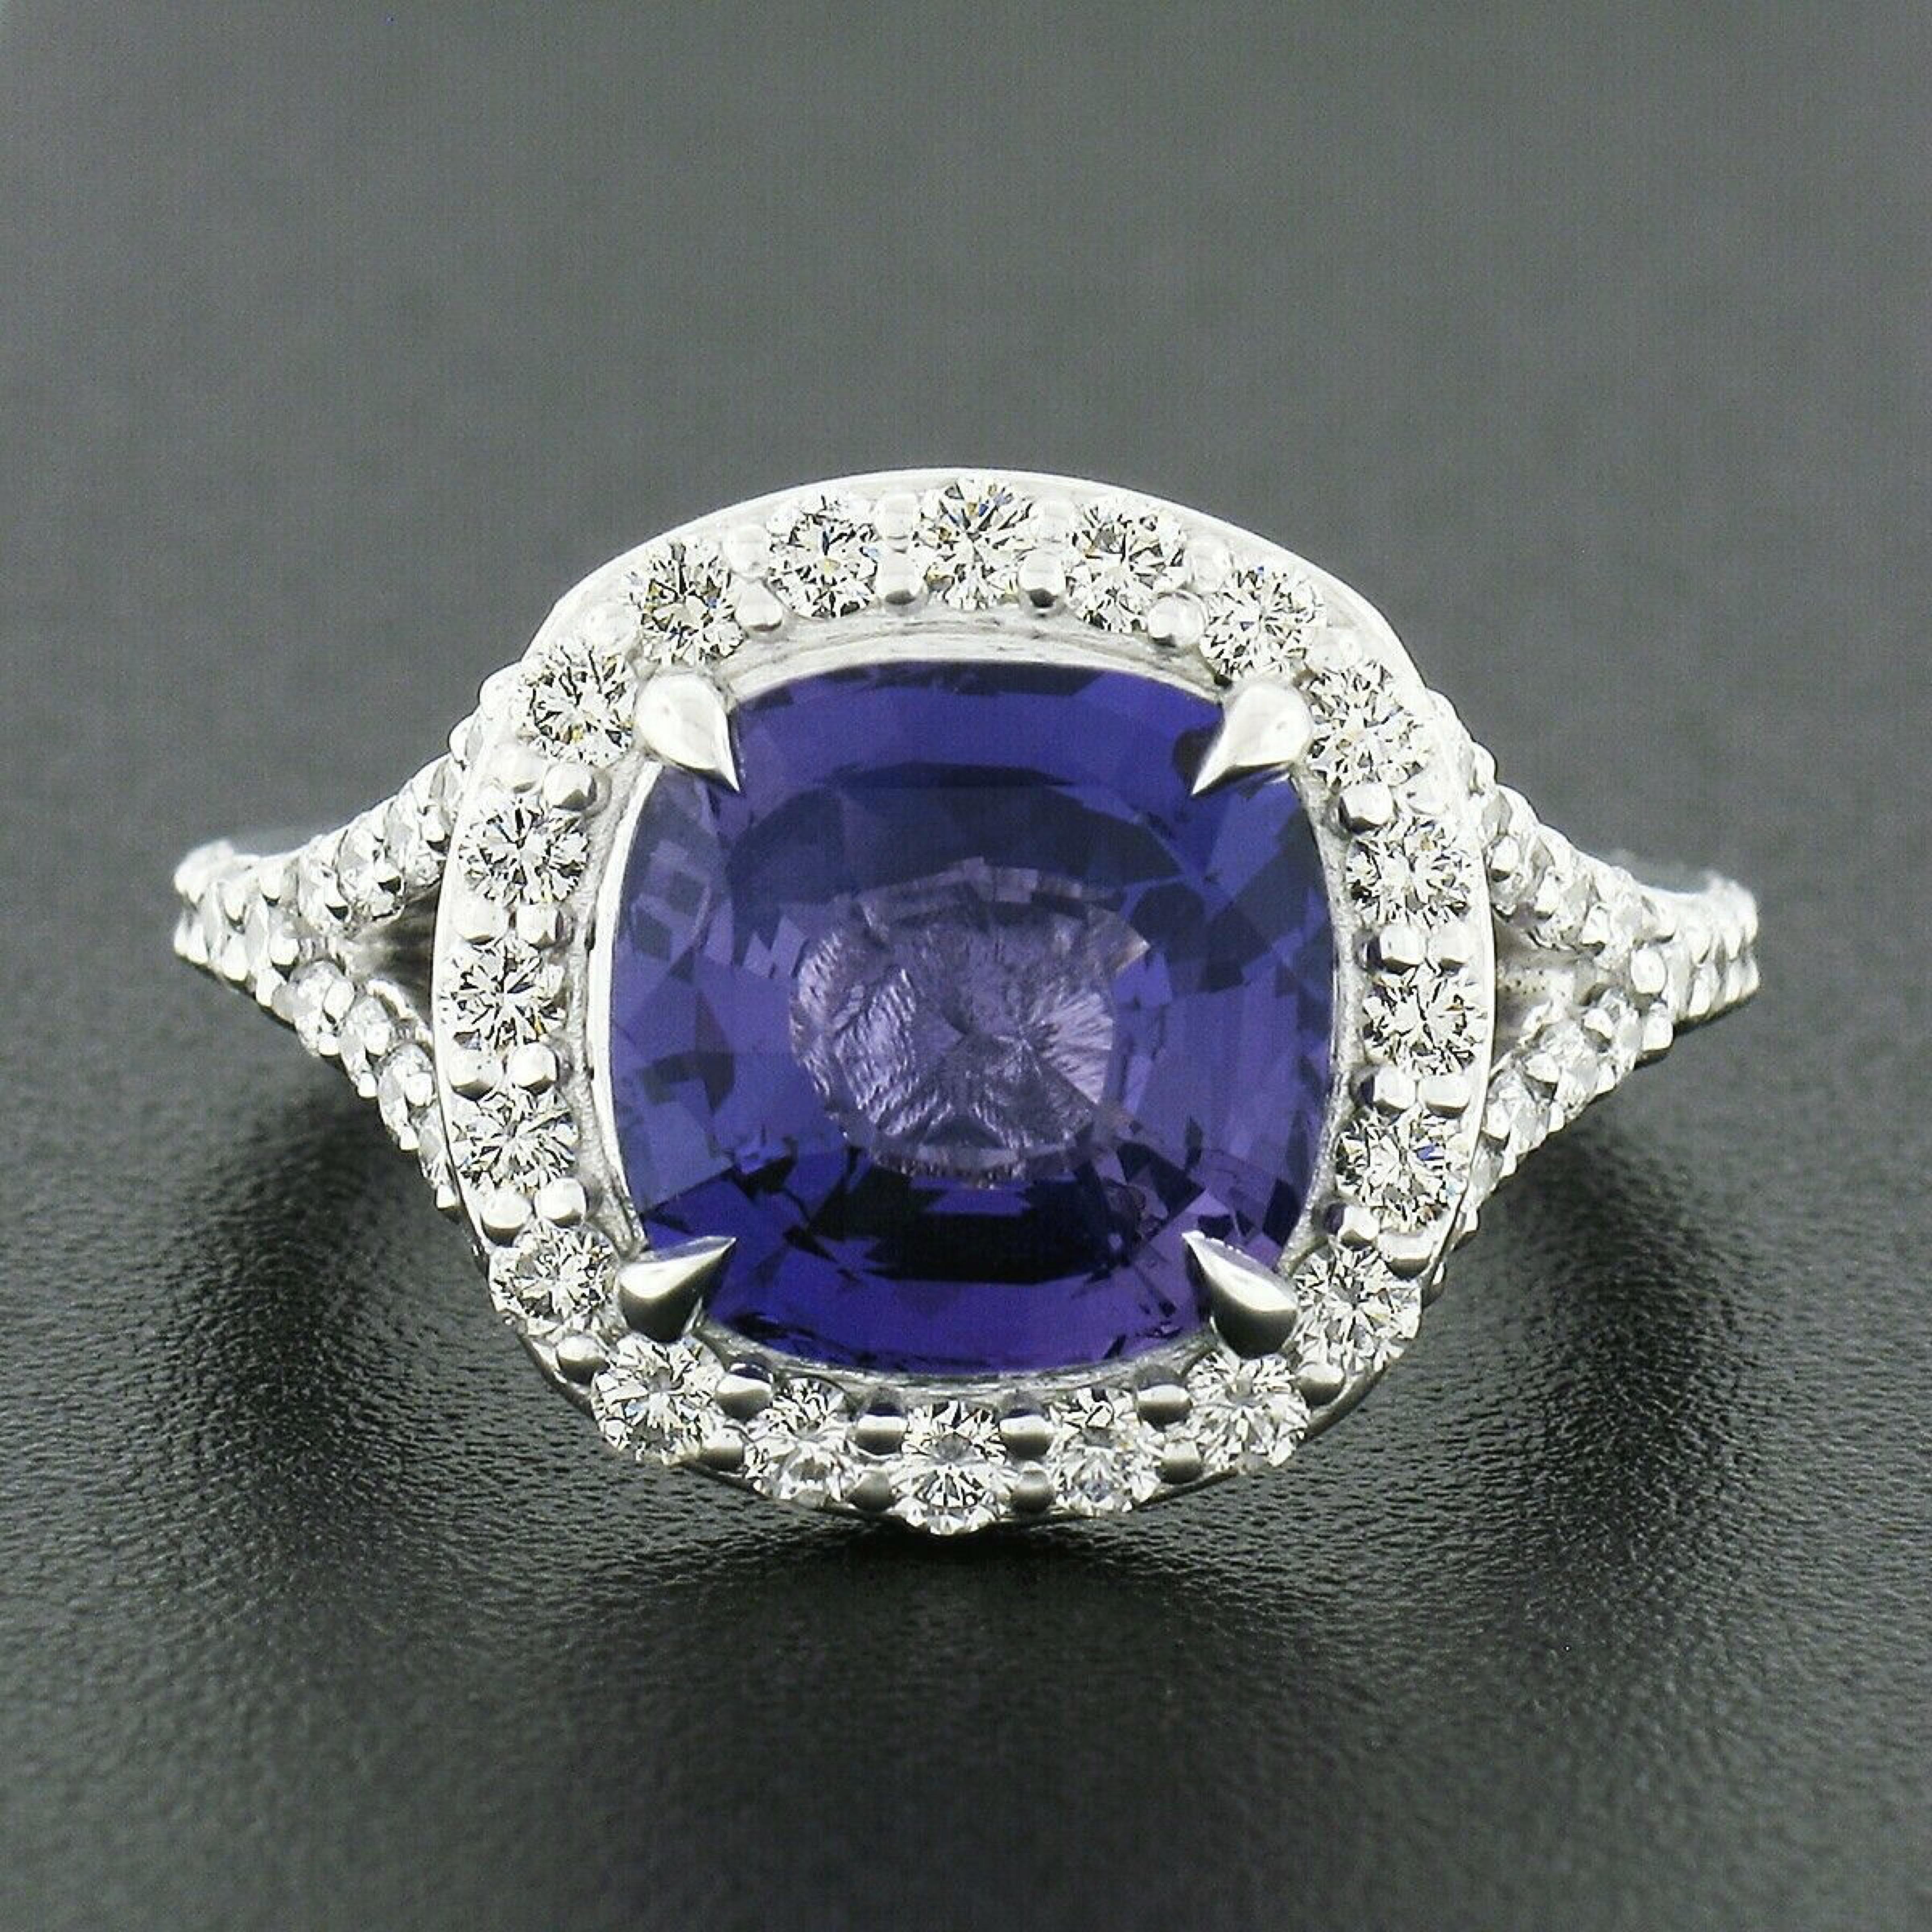 This is an absolutely breathtaking and well made engagement or cocktail ring that is newly crafted from solid platinum featuring a gorgeous natural purple sapphire at its center accented with super fine quality diamonds throughout. The cushion cut